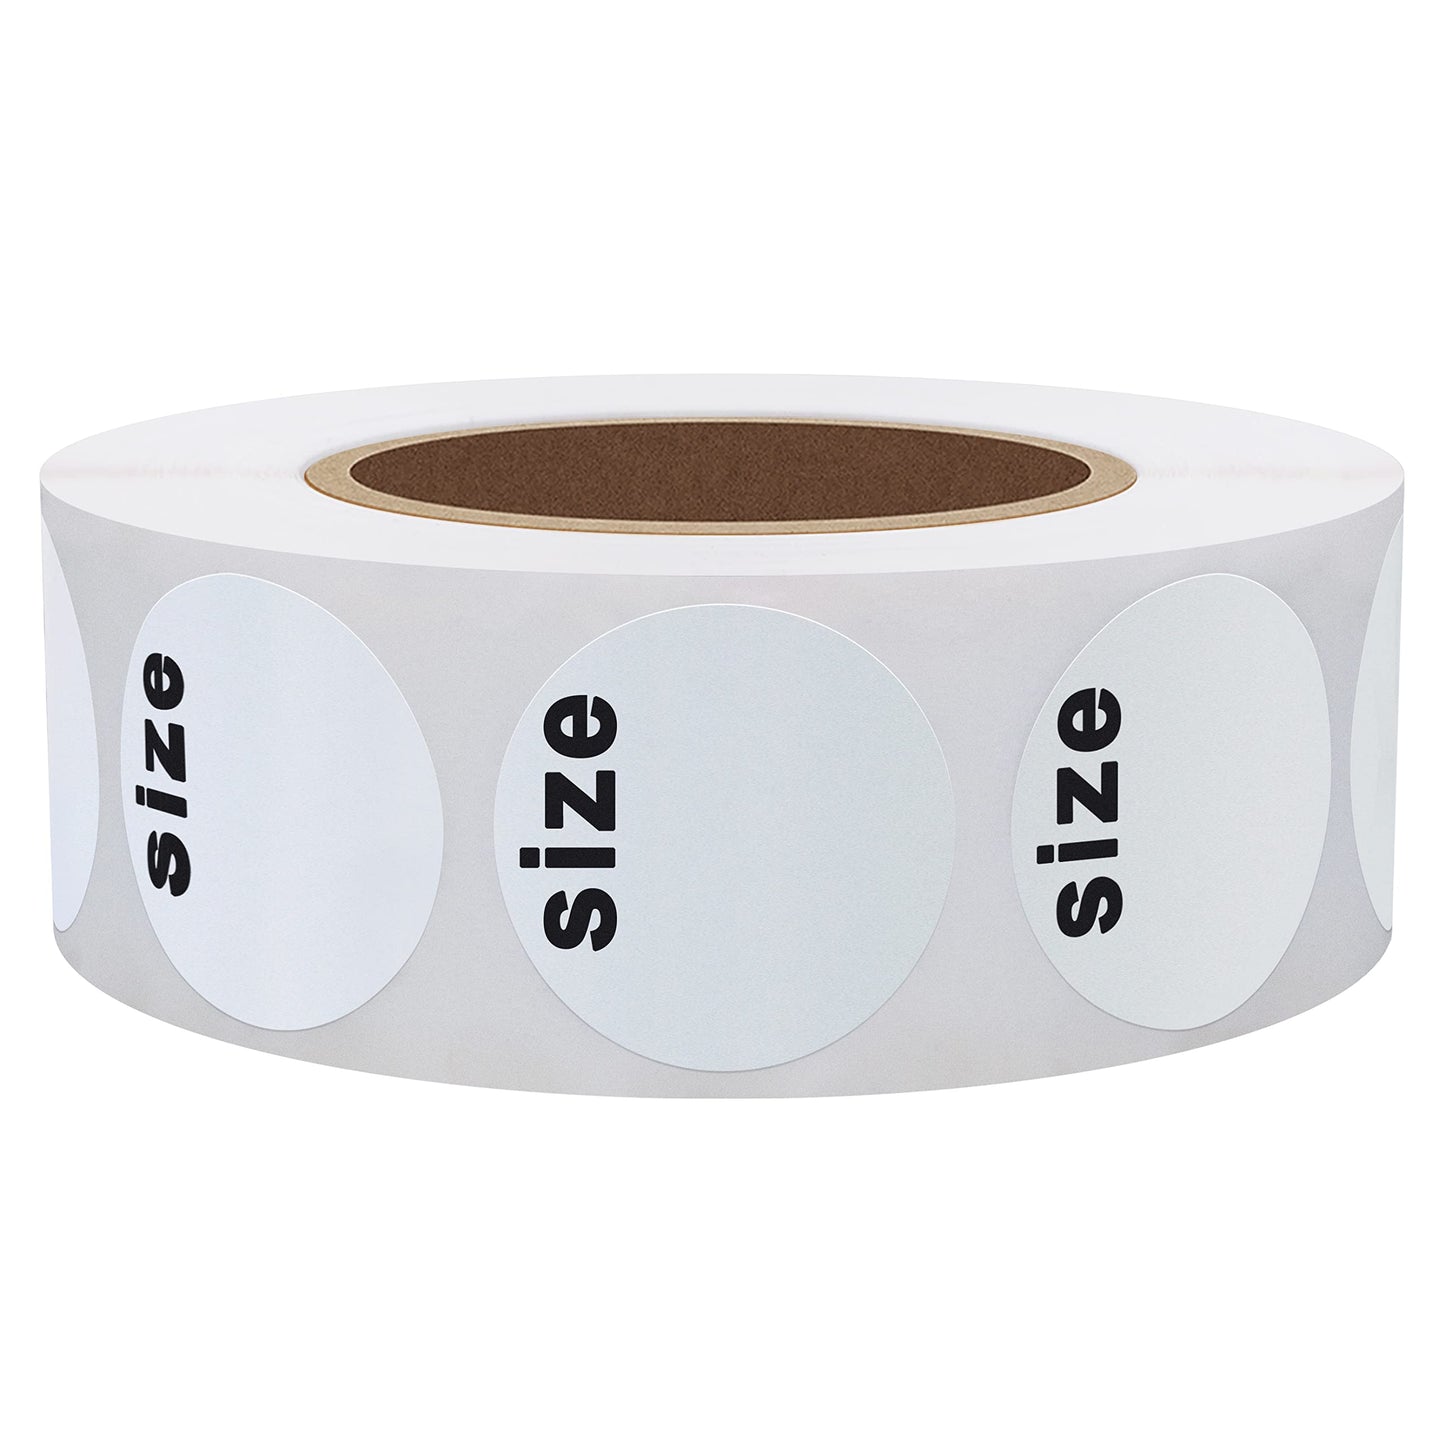 Hybsk White Blank Clothing Size Stickers 1 Inch Round Adhesive Labels for Apparel Retail Total 500 Per Roll